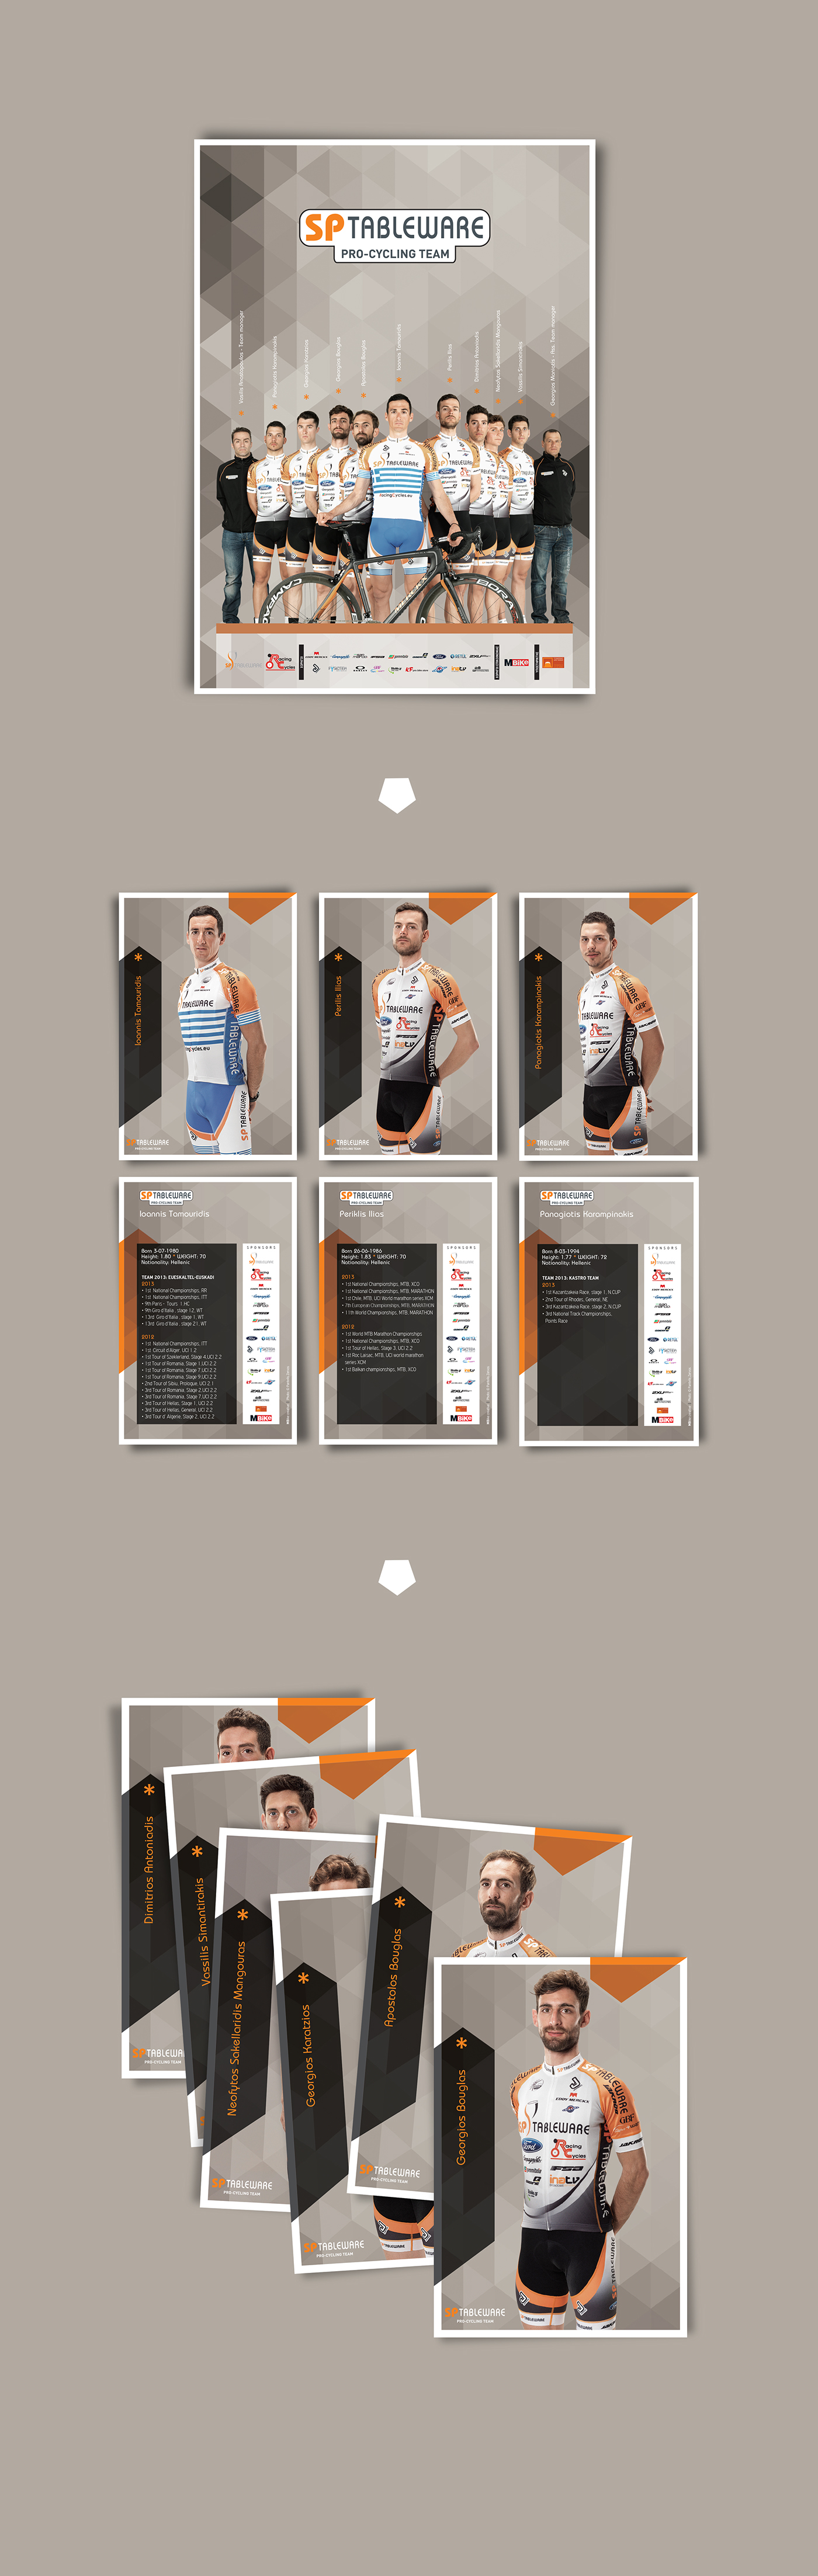 Cycling Team sp tableware poster autograph Bicycle professional team